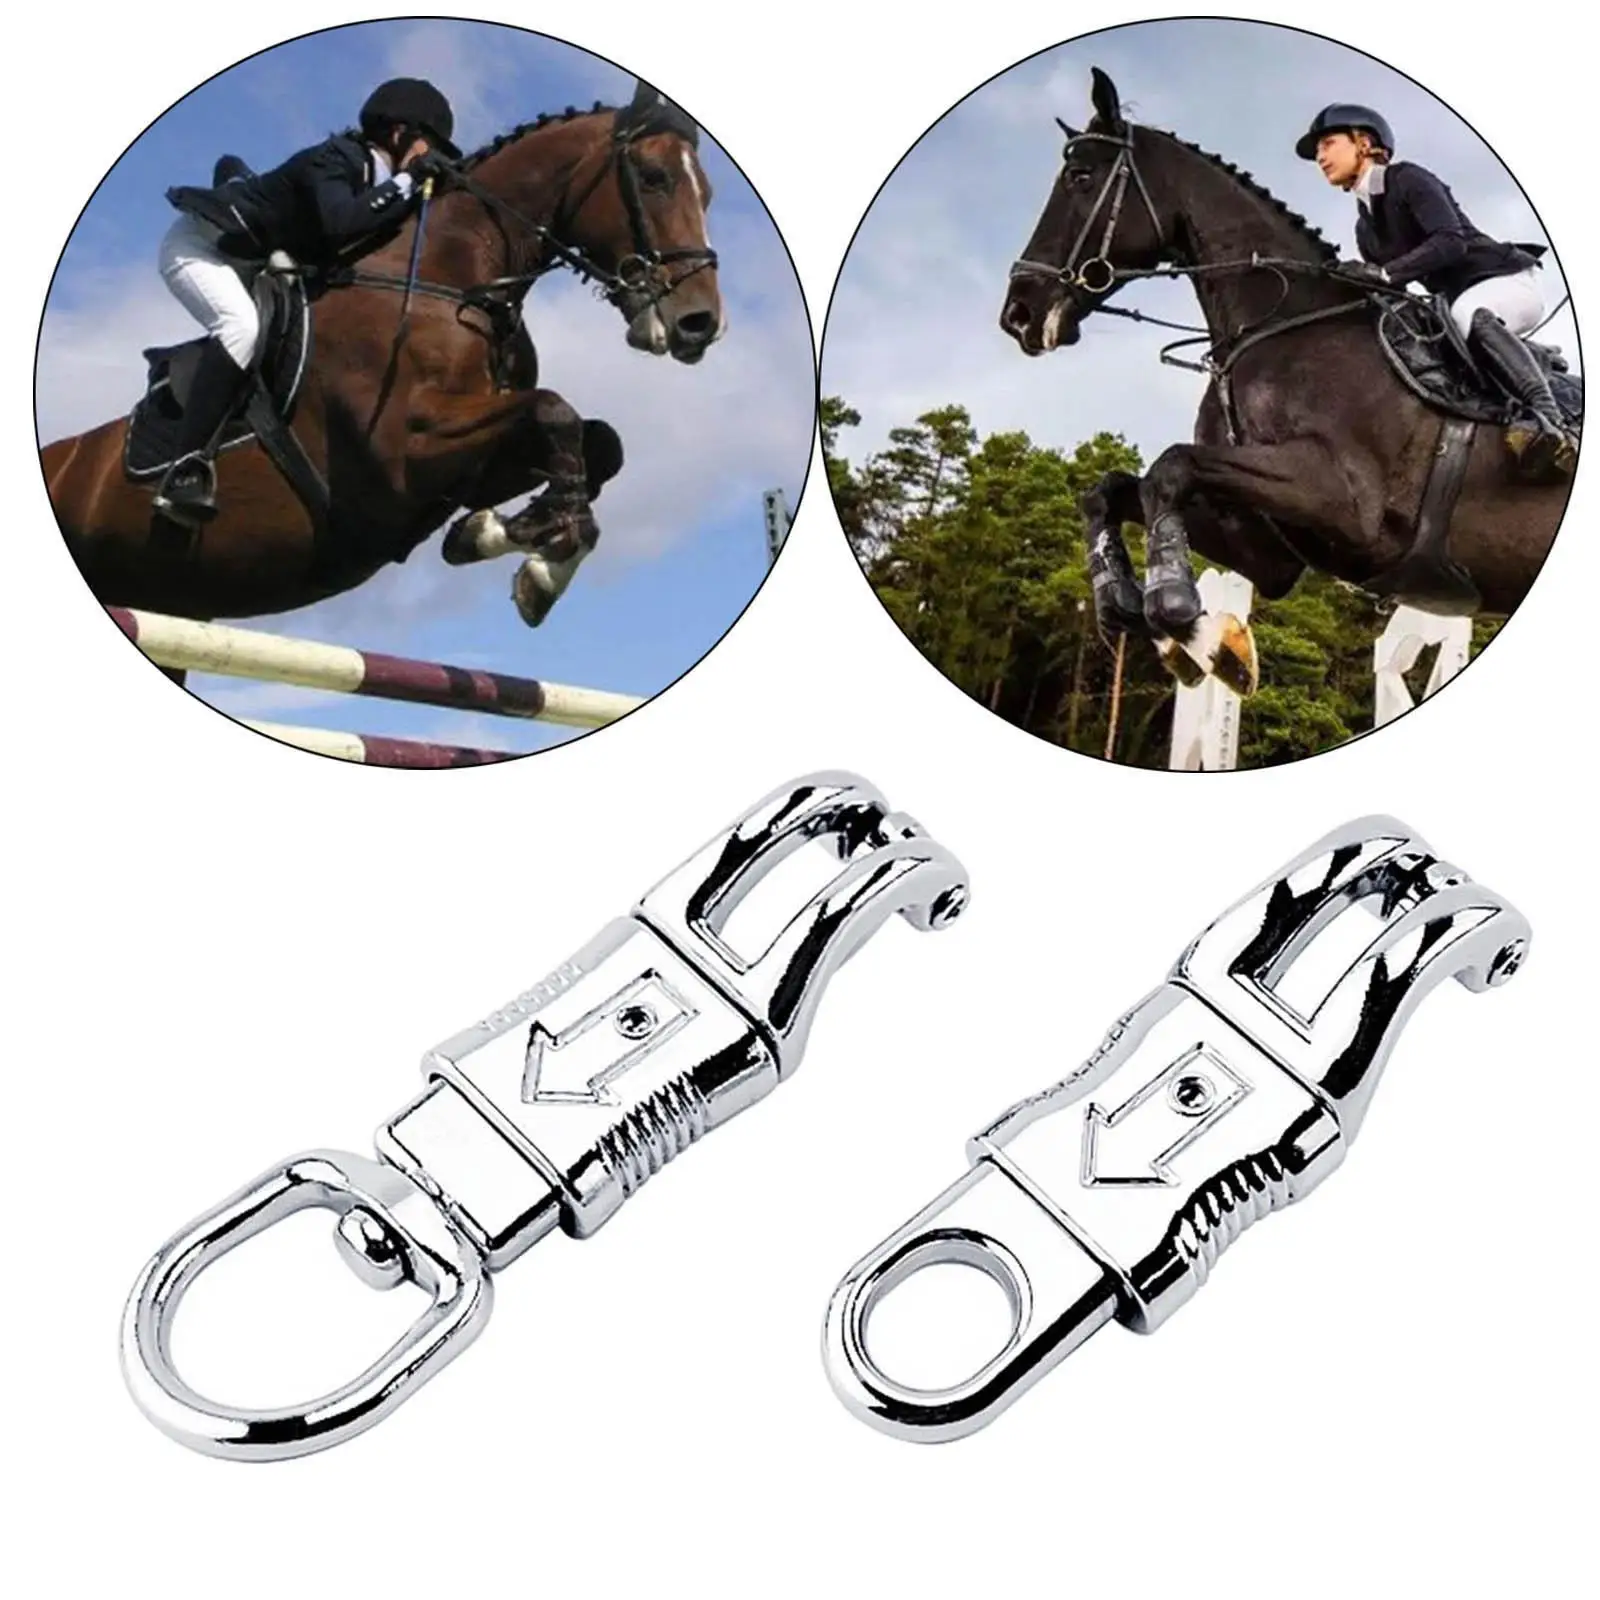 Panic Snap for Paracord Quick Release Equestrian Leads Reins Hook Fit for Horse Riding